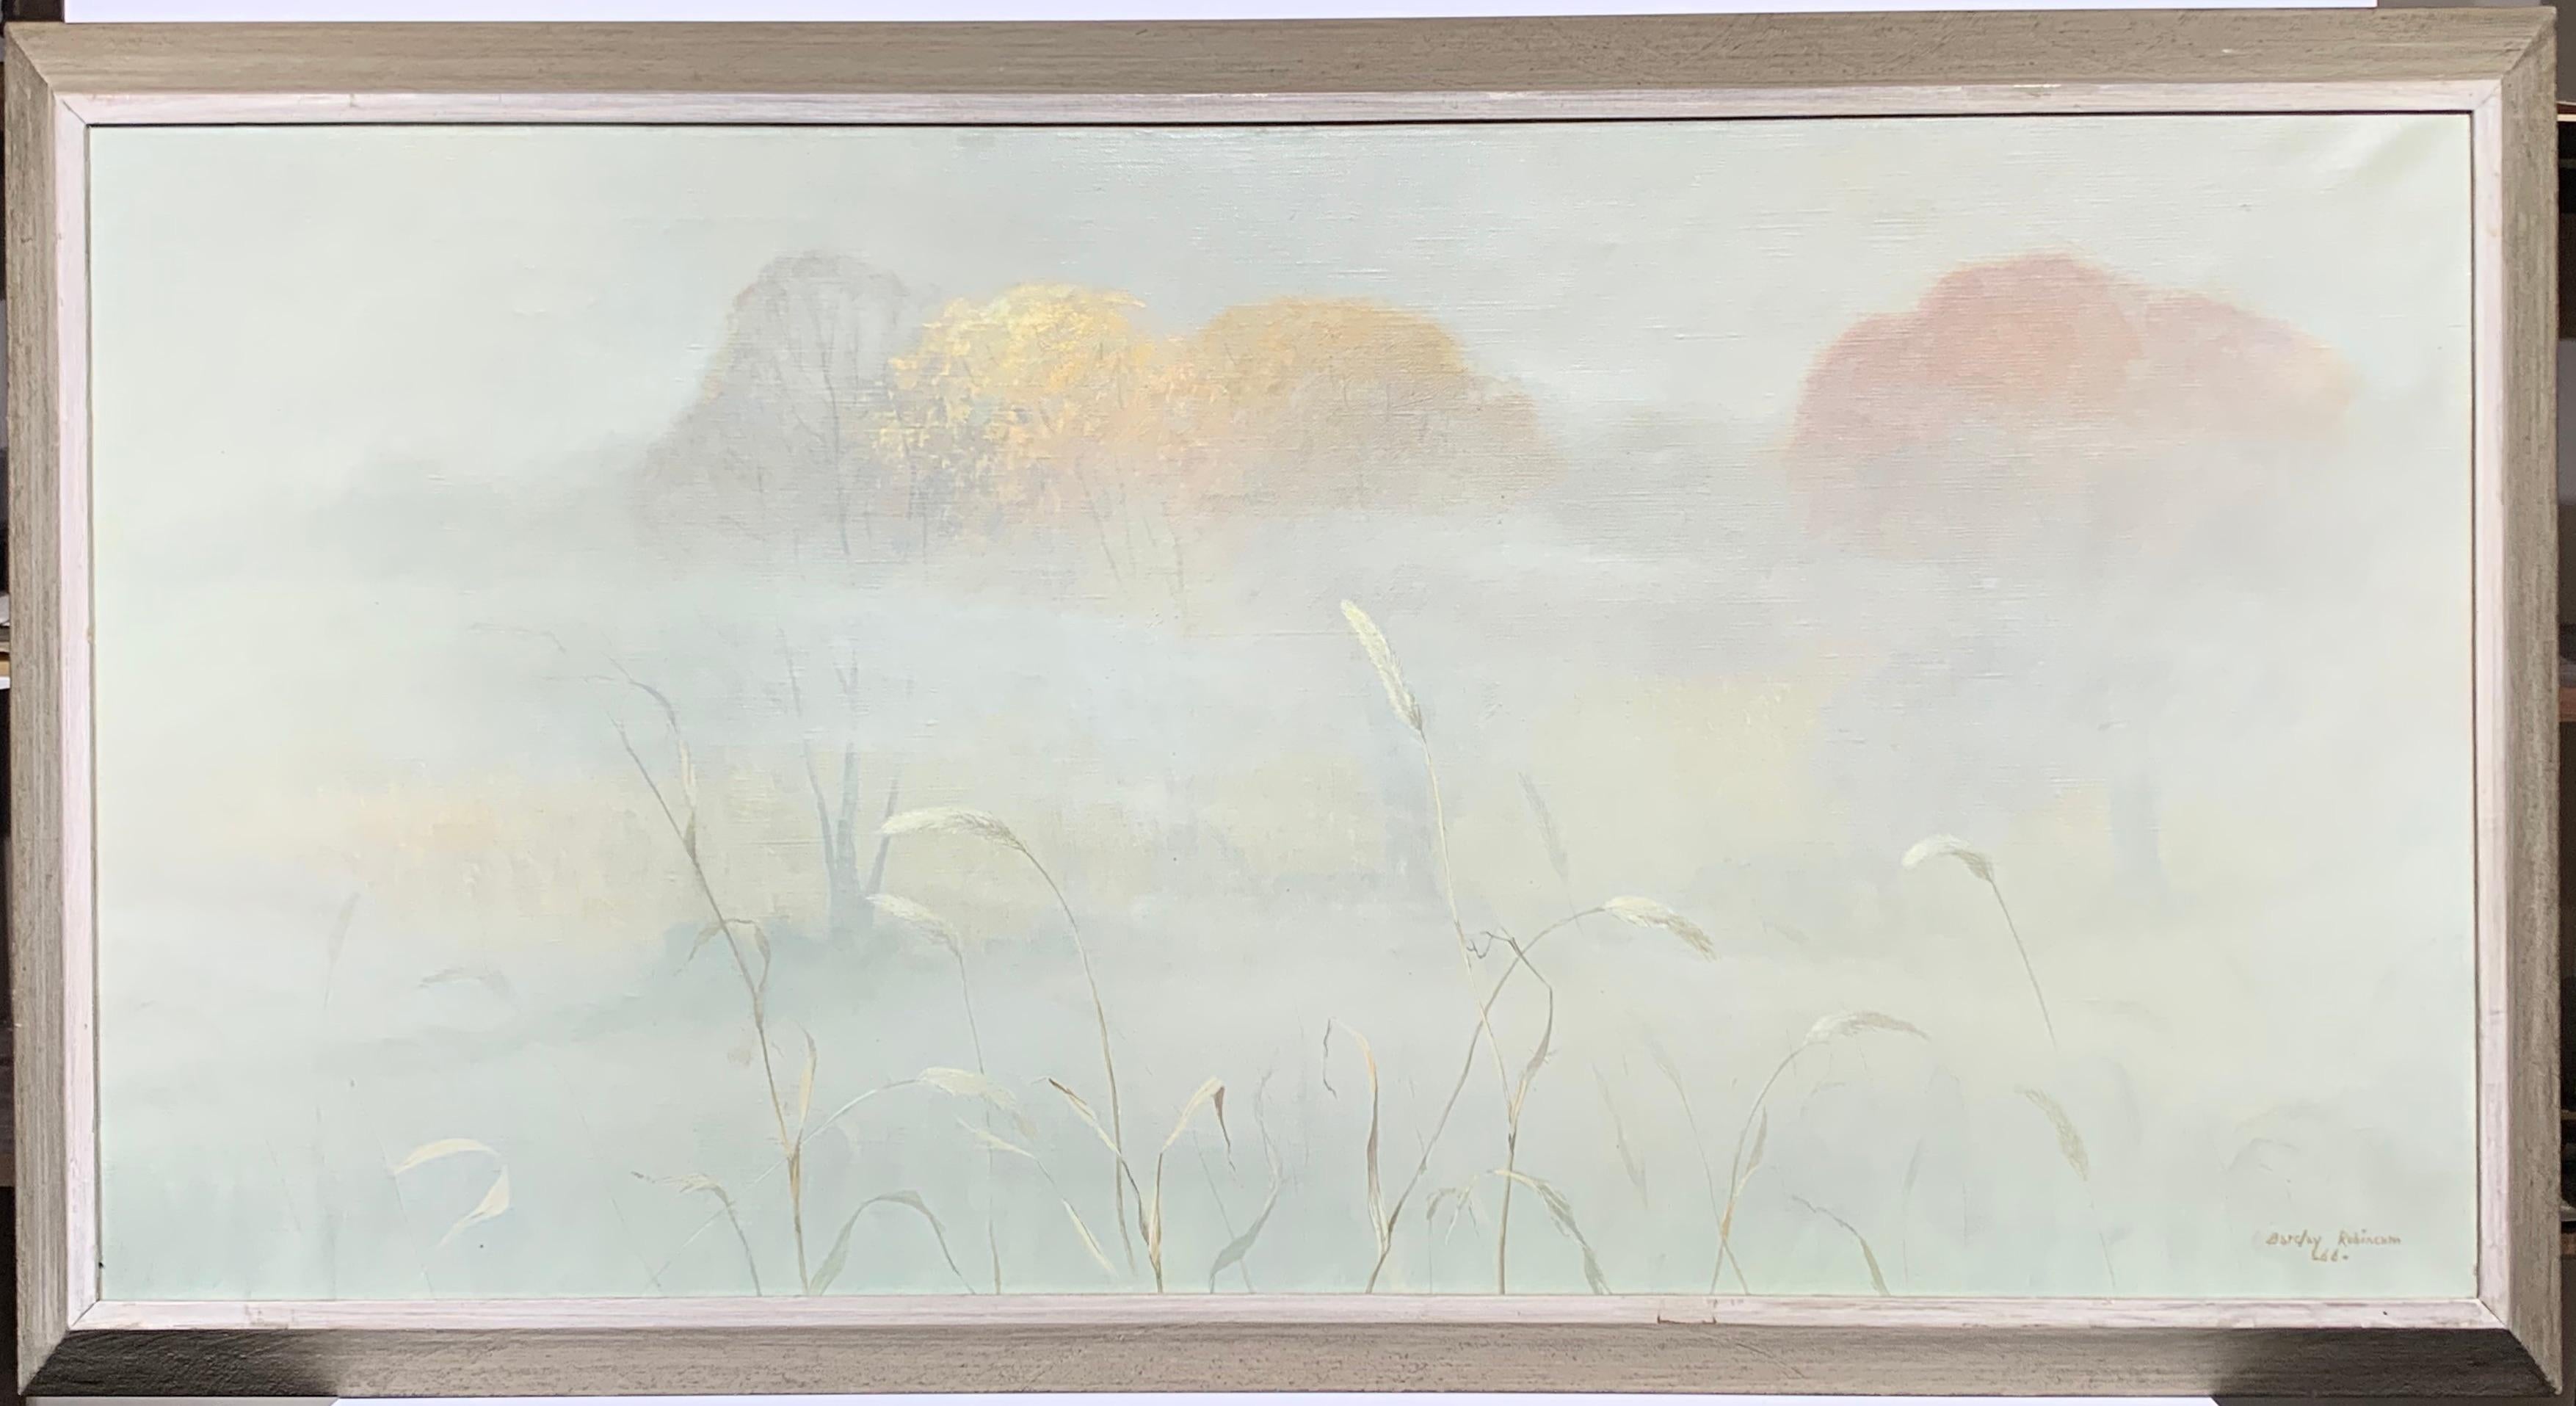 October Fog (West Chester, Chester County PA Landscape) - Painting by Barclay Rubincam